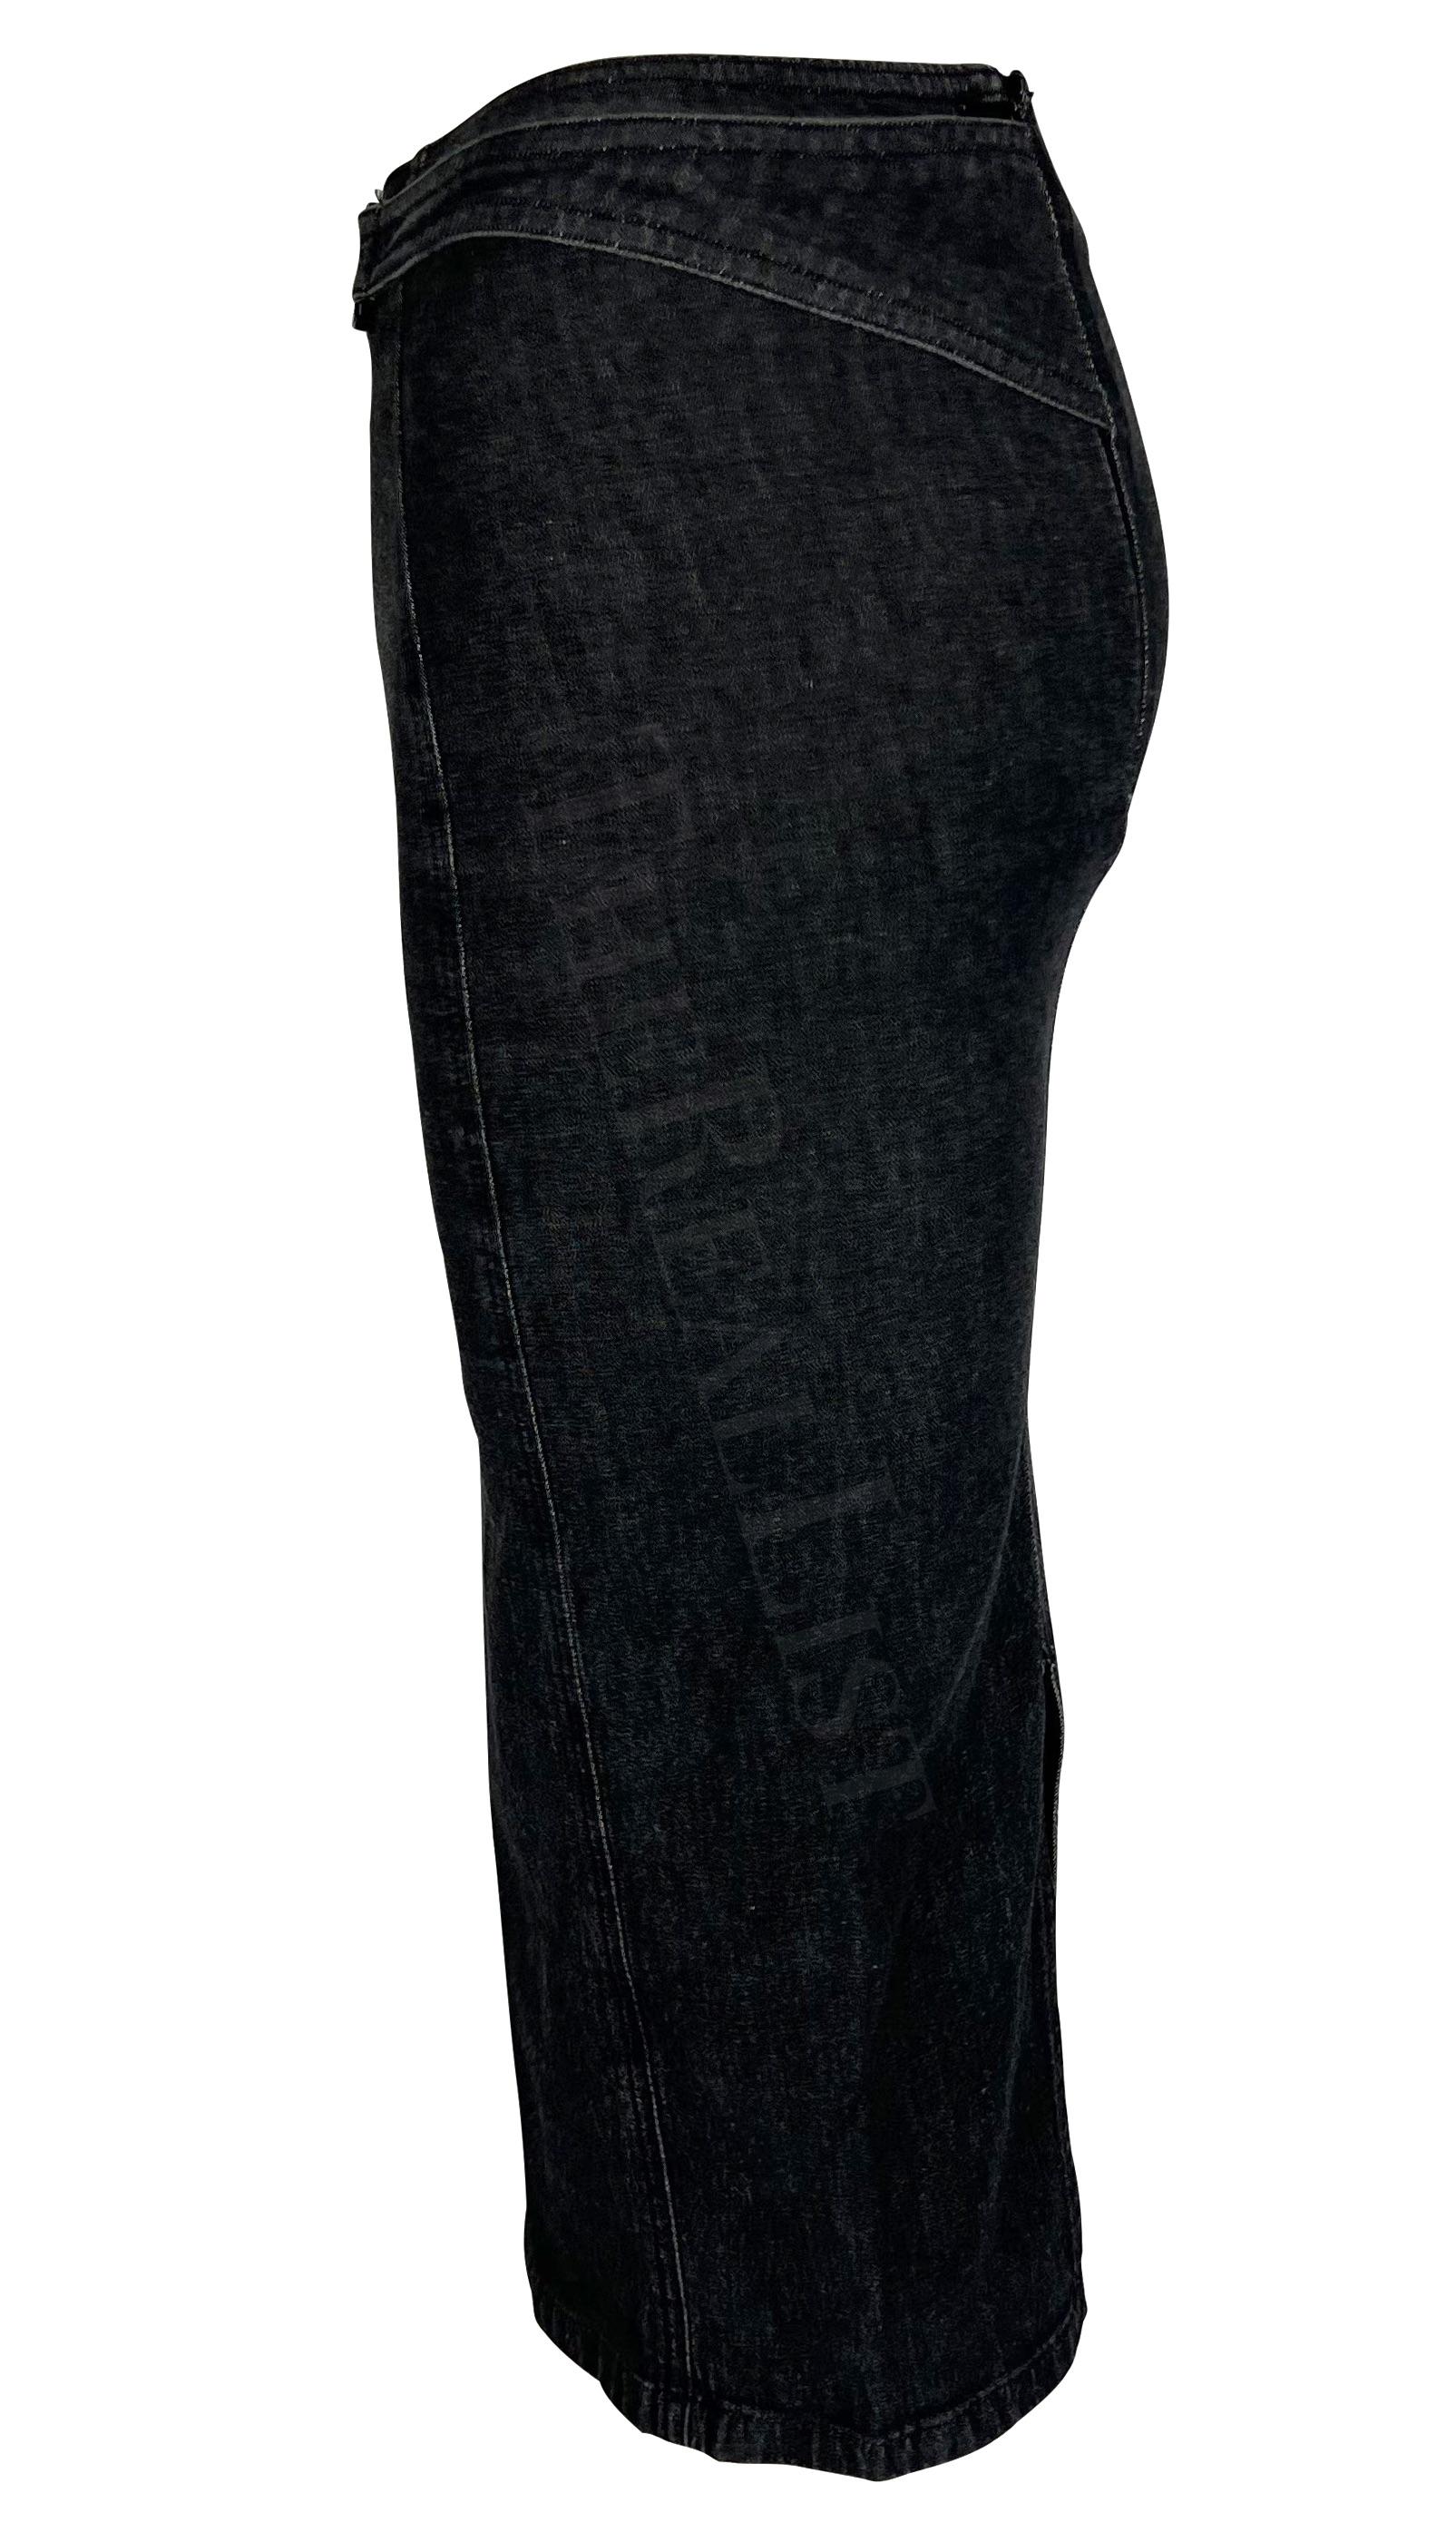 Women's 2001 Gucci by Tom Ford Dark Wash Denim Skirt with Metal Buckle For Sale